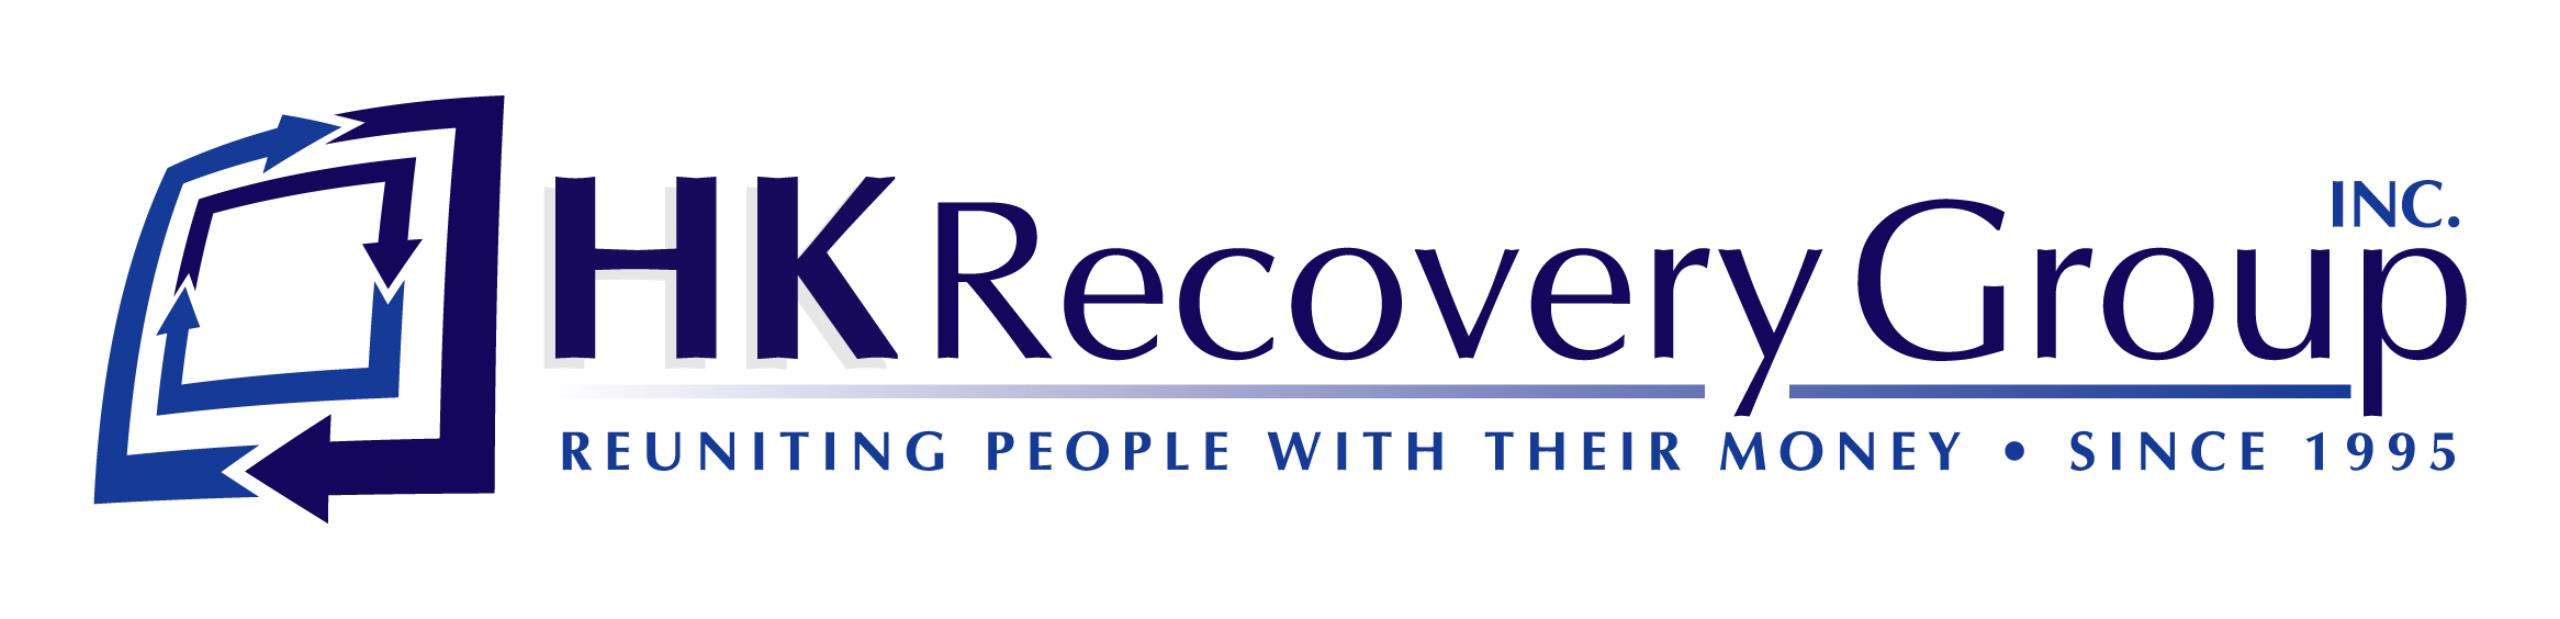 HK Recovery Group Inc. Logo